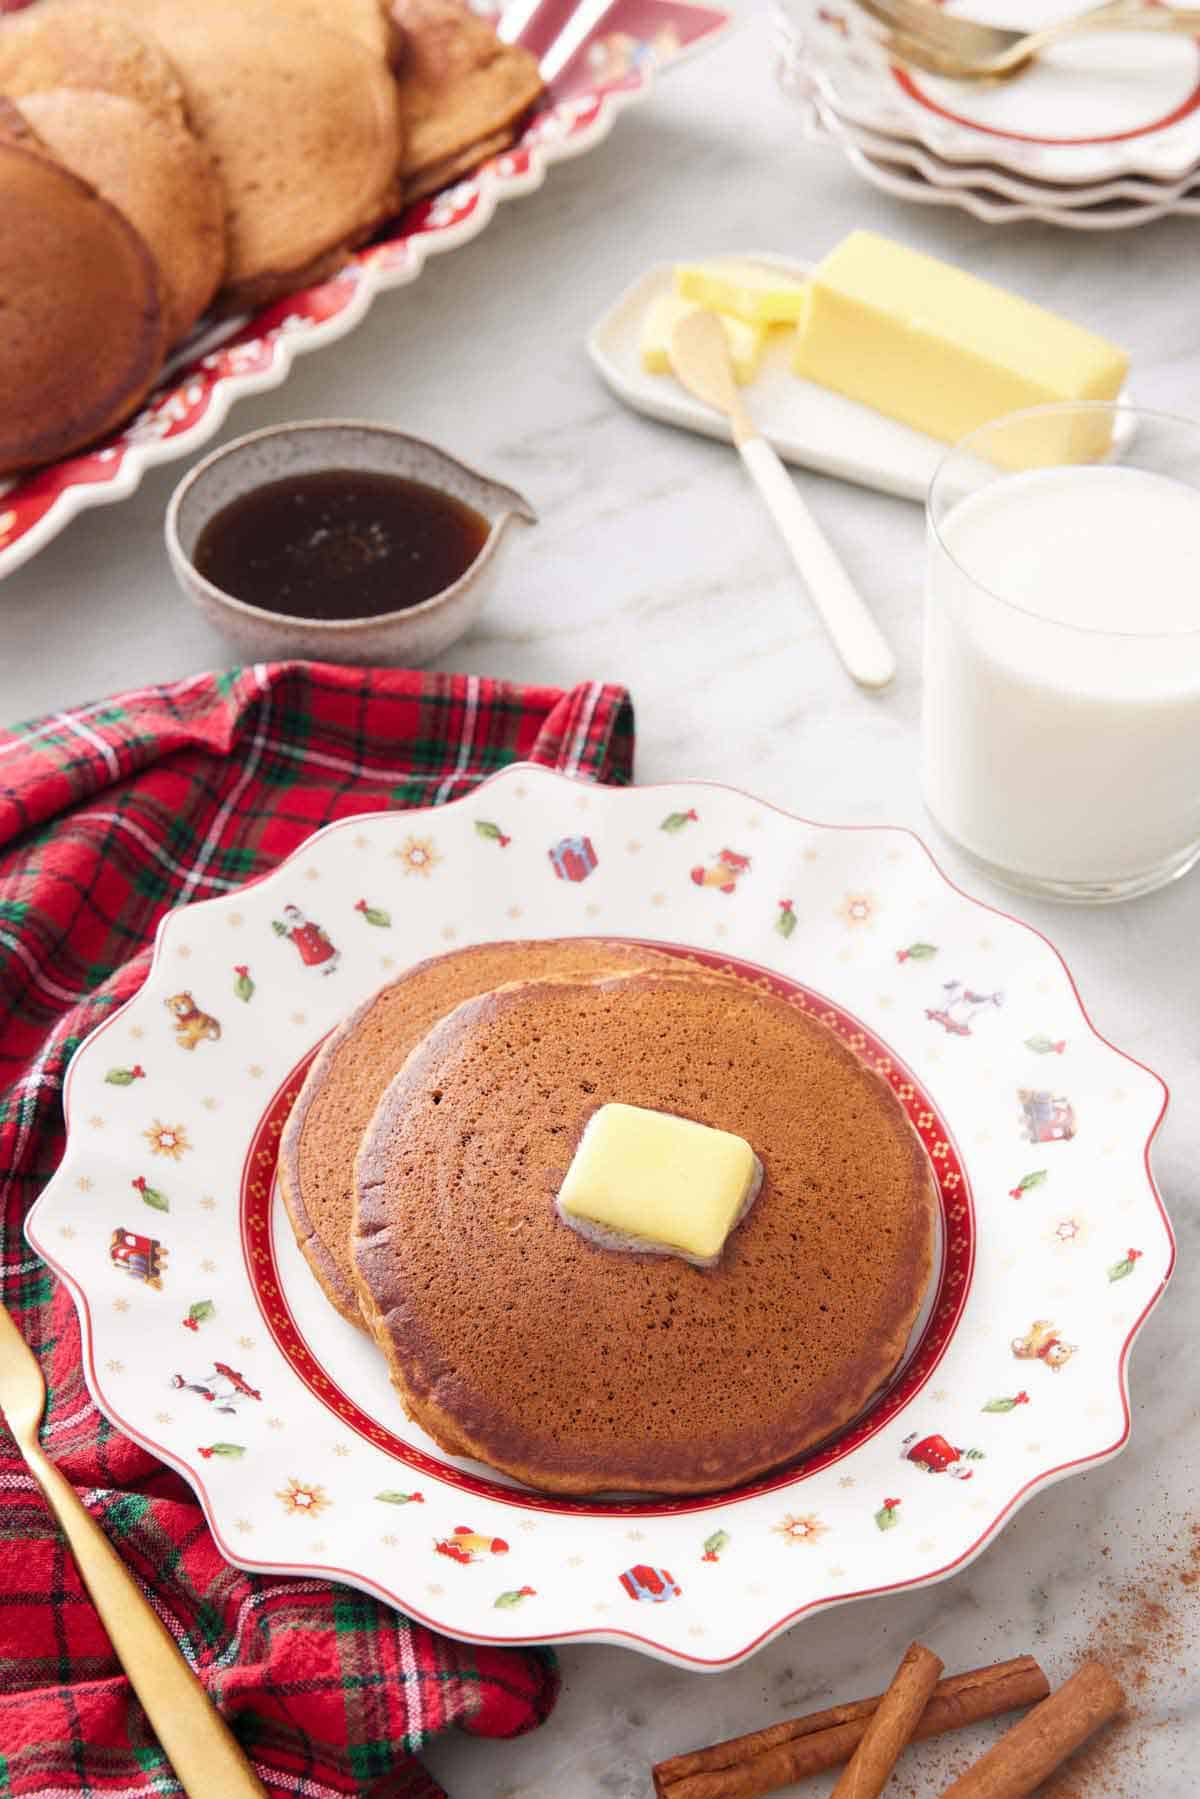 A plate with two gingerbread pancakes with a knob of butter on top. A glass of milk in the back along with butter.